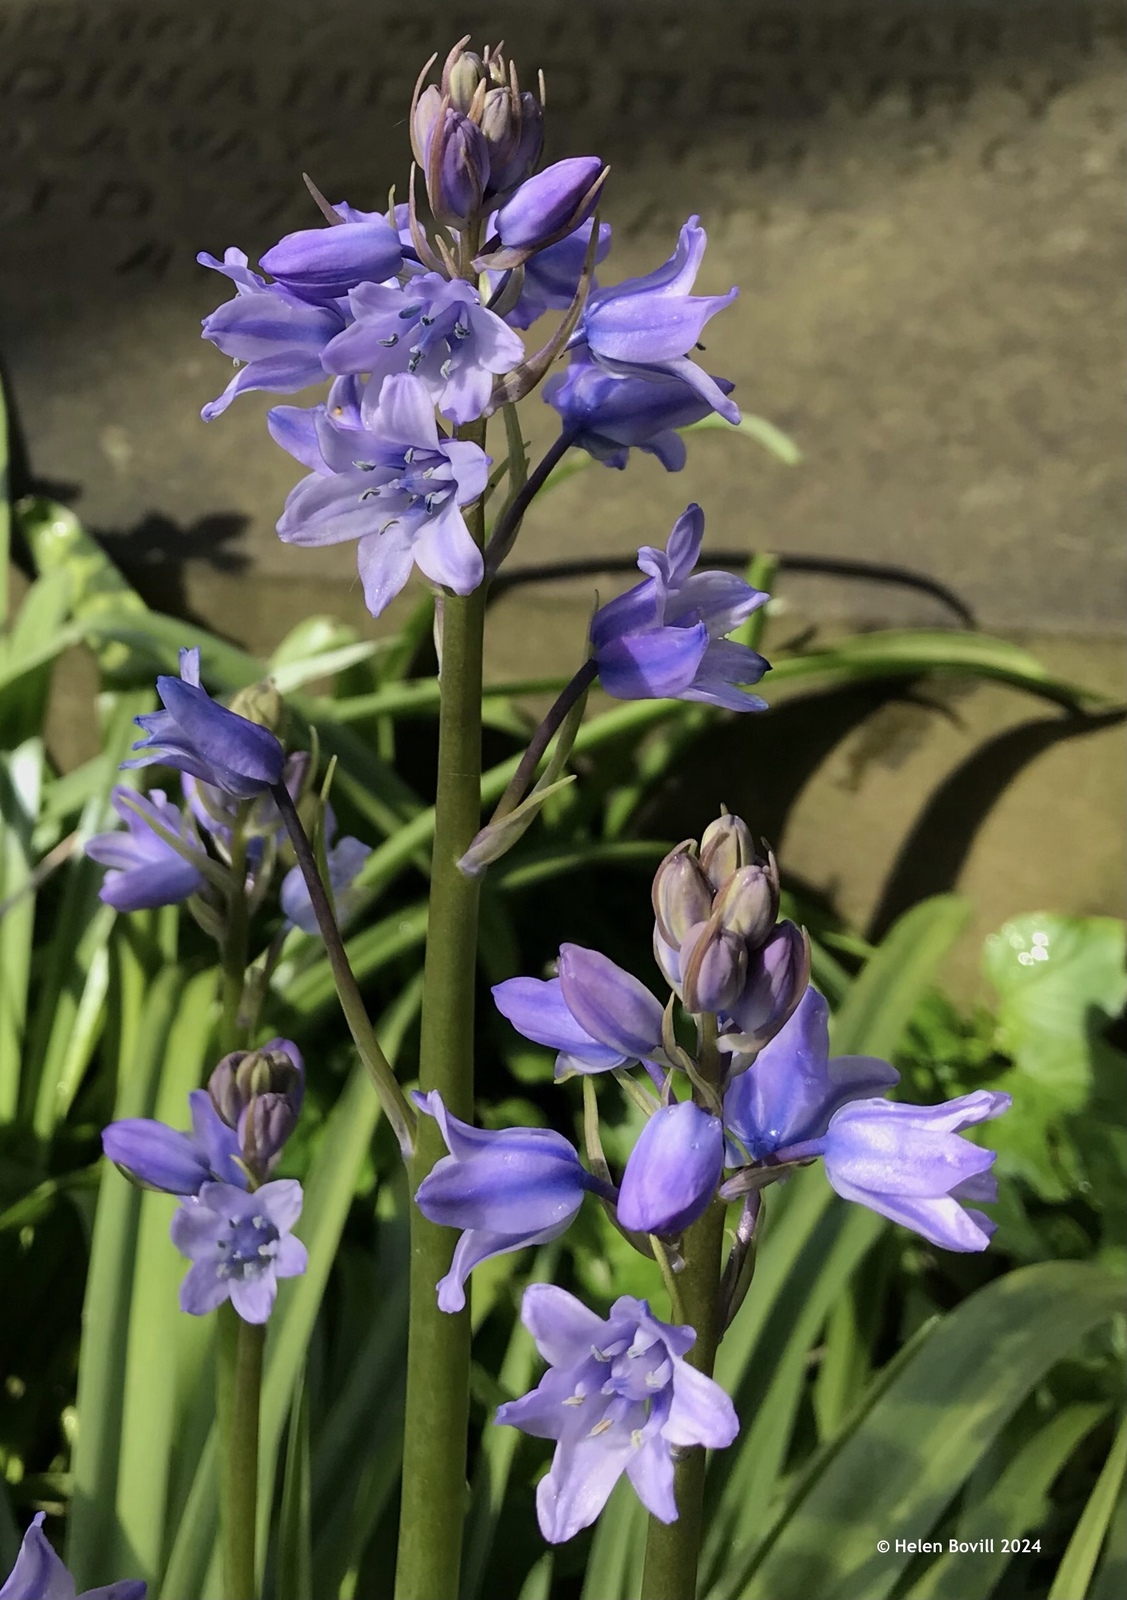 Bluebells growing near a grave in the cemetery